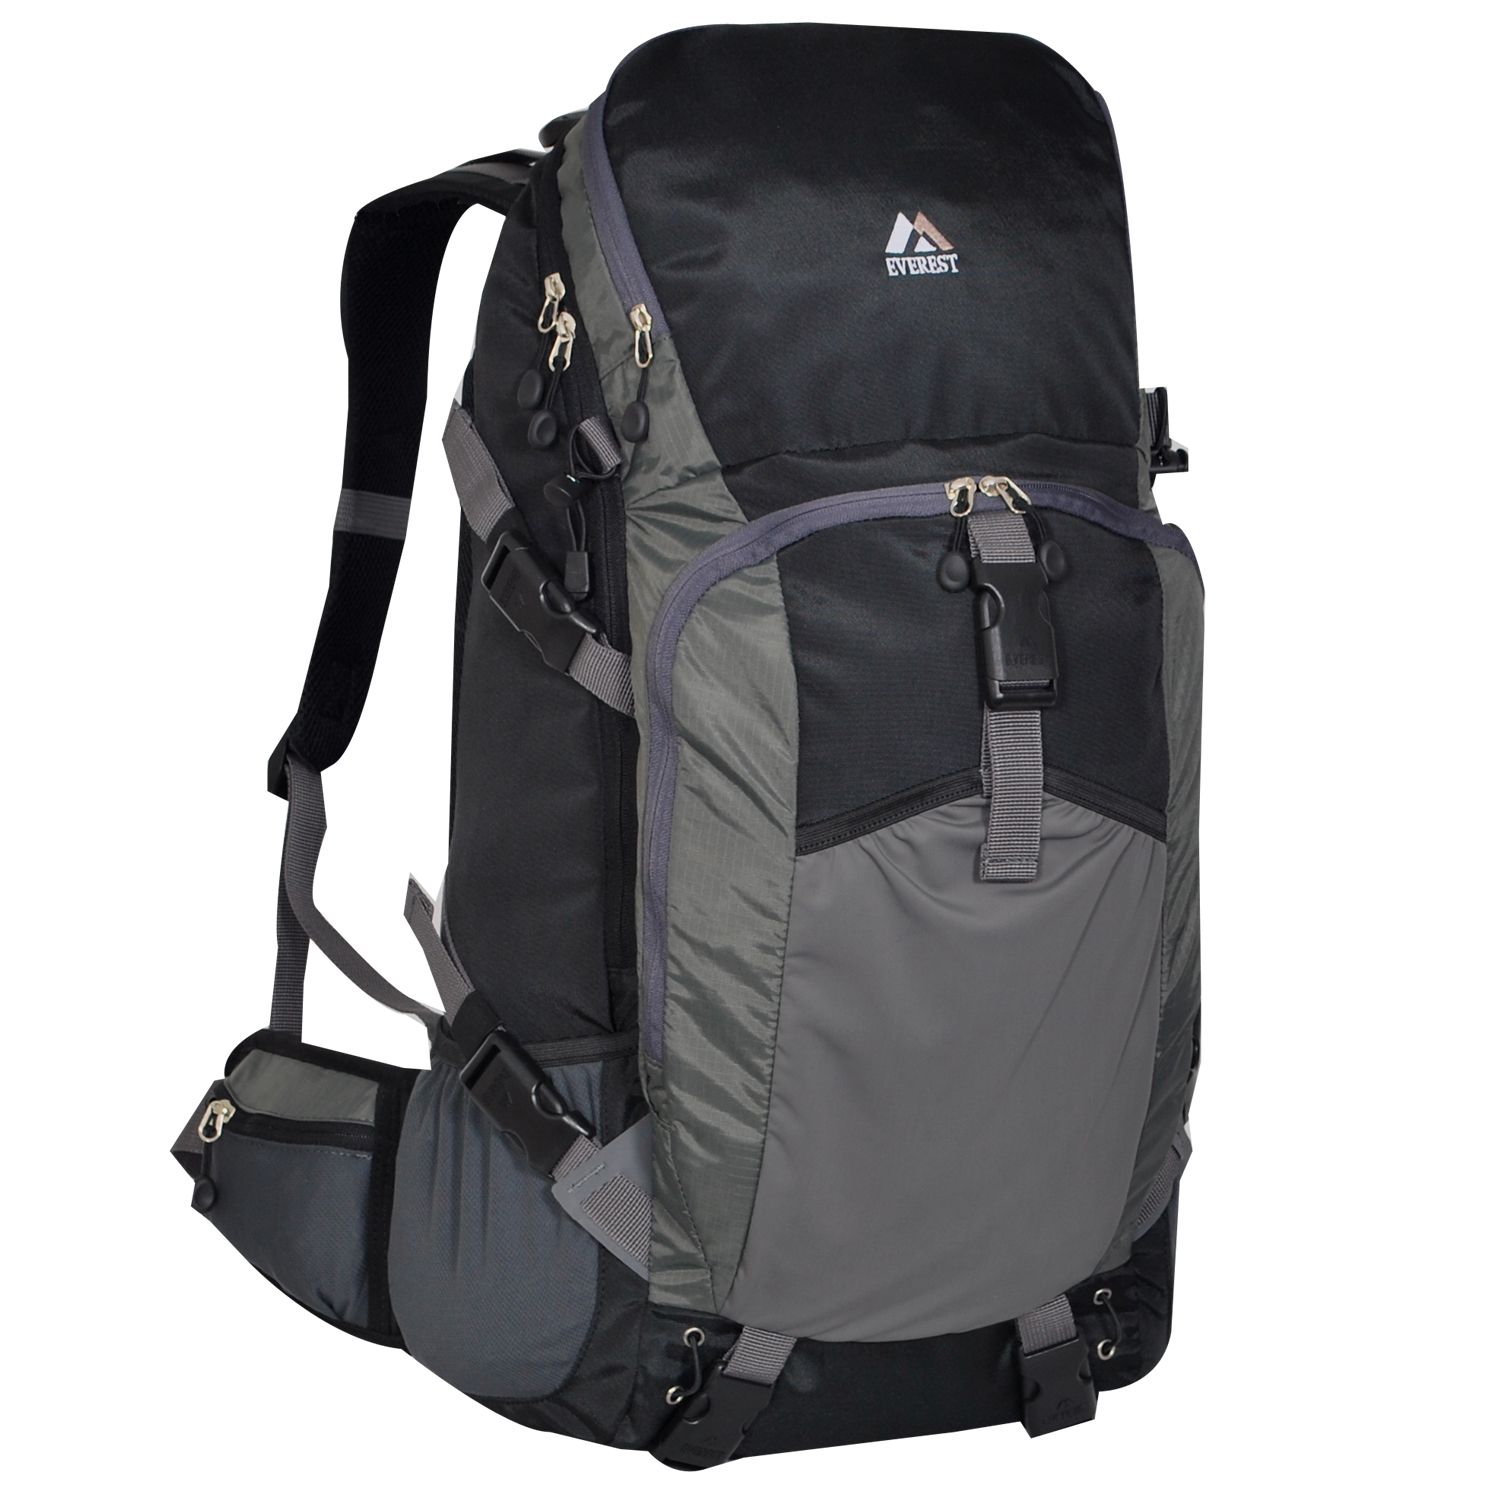 Everest Expedition Hiking Pack - image 1 of 5